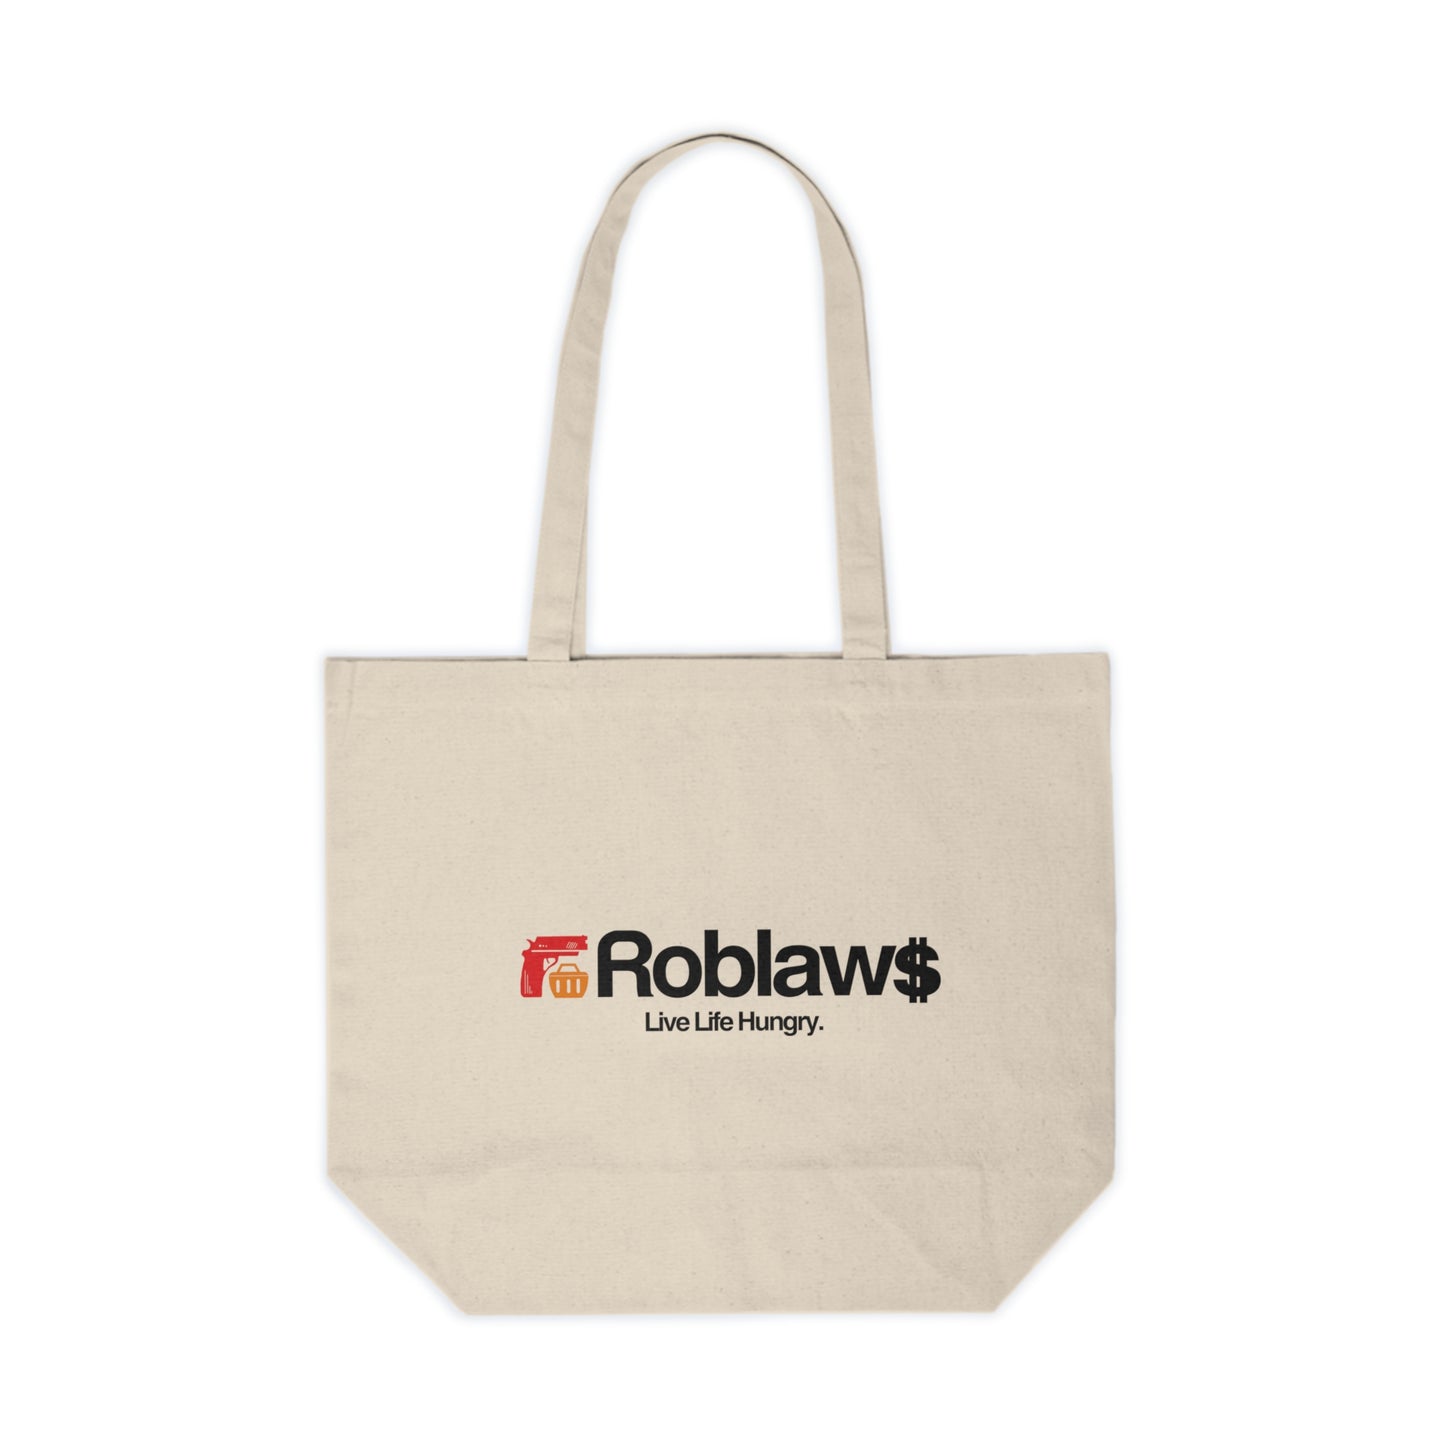 Roblaws Canvas Shopping Tote